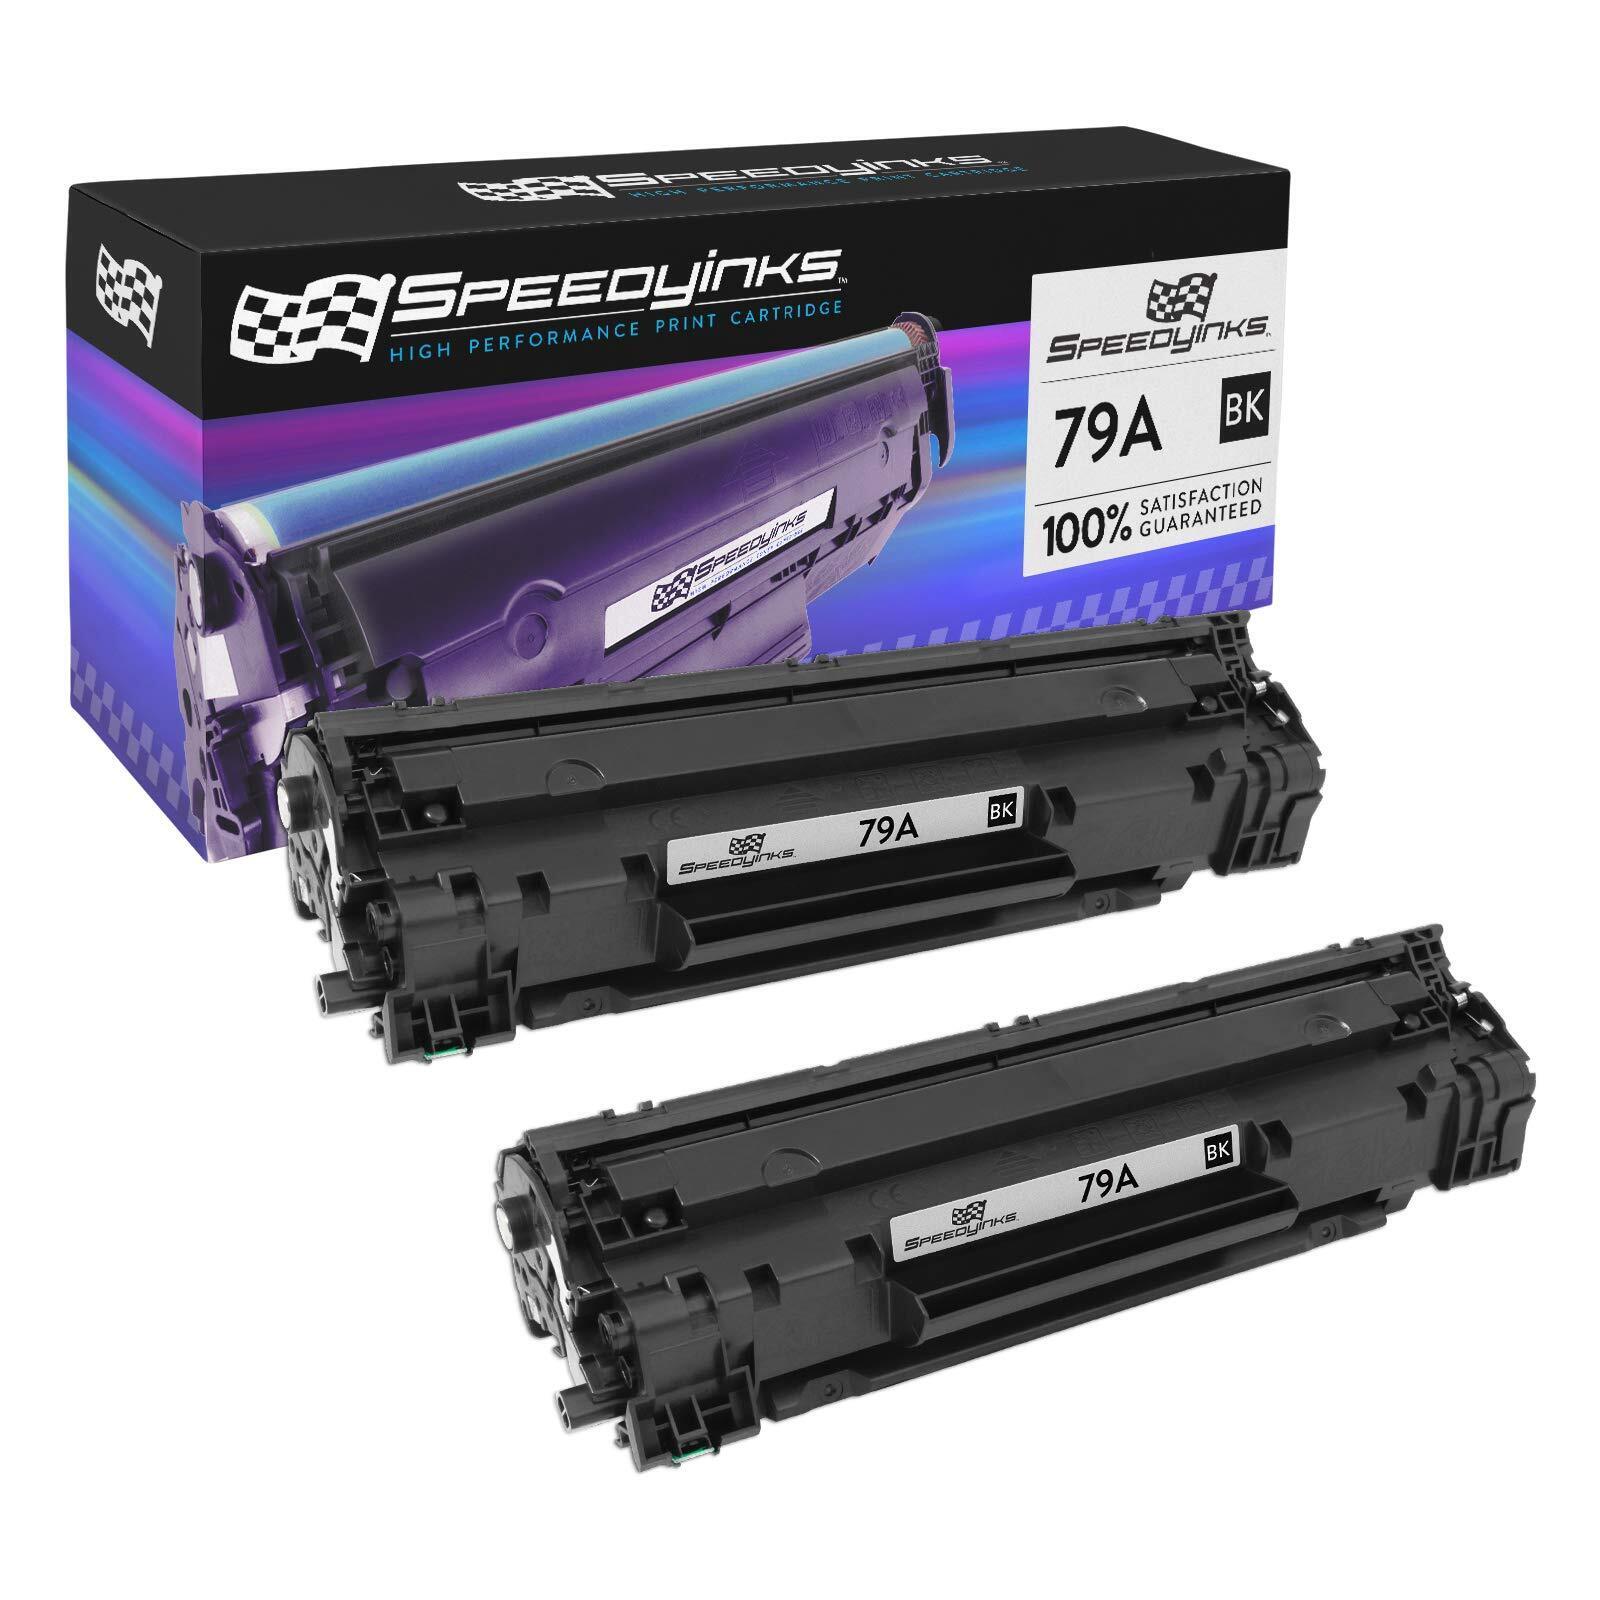 Speedy Inks Compatible Toner Cartridge Replacement for HP 79A (Black, 2-Pack)